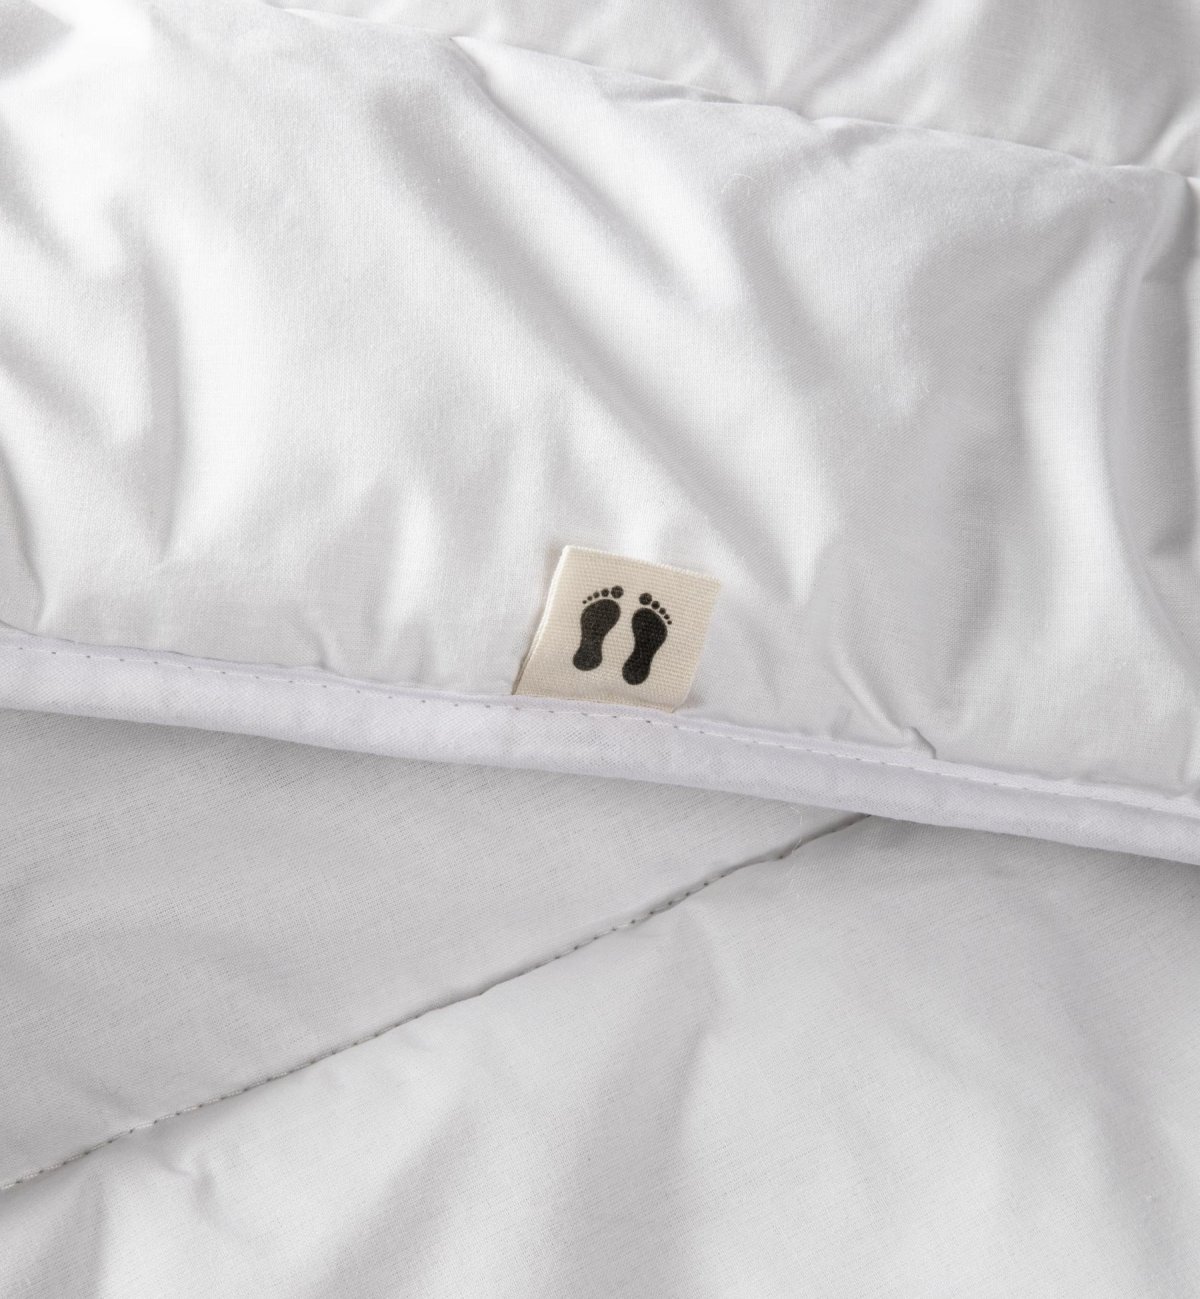 Organic Cotton comforter for a better sleep - Recycled fibers